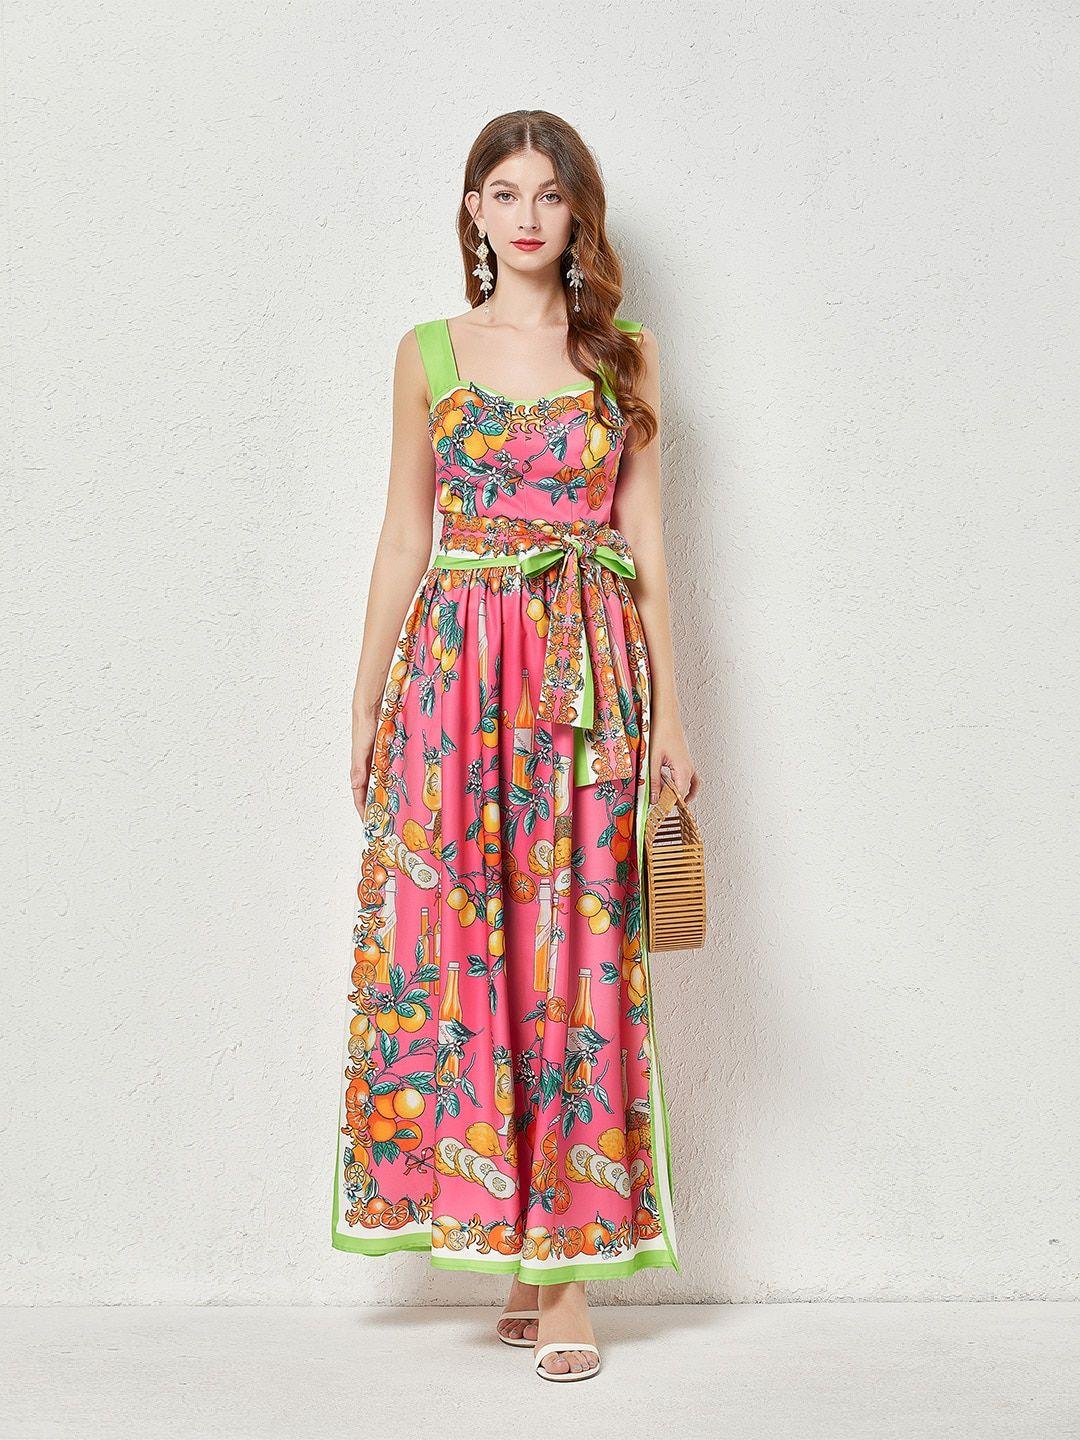 jc-collection-pink-floral-print-maxi-dress